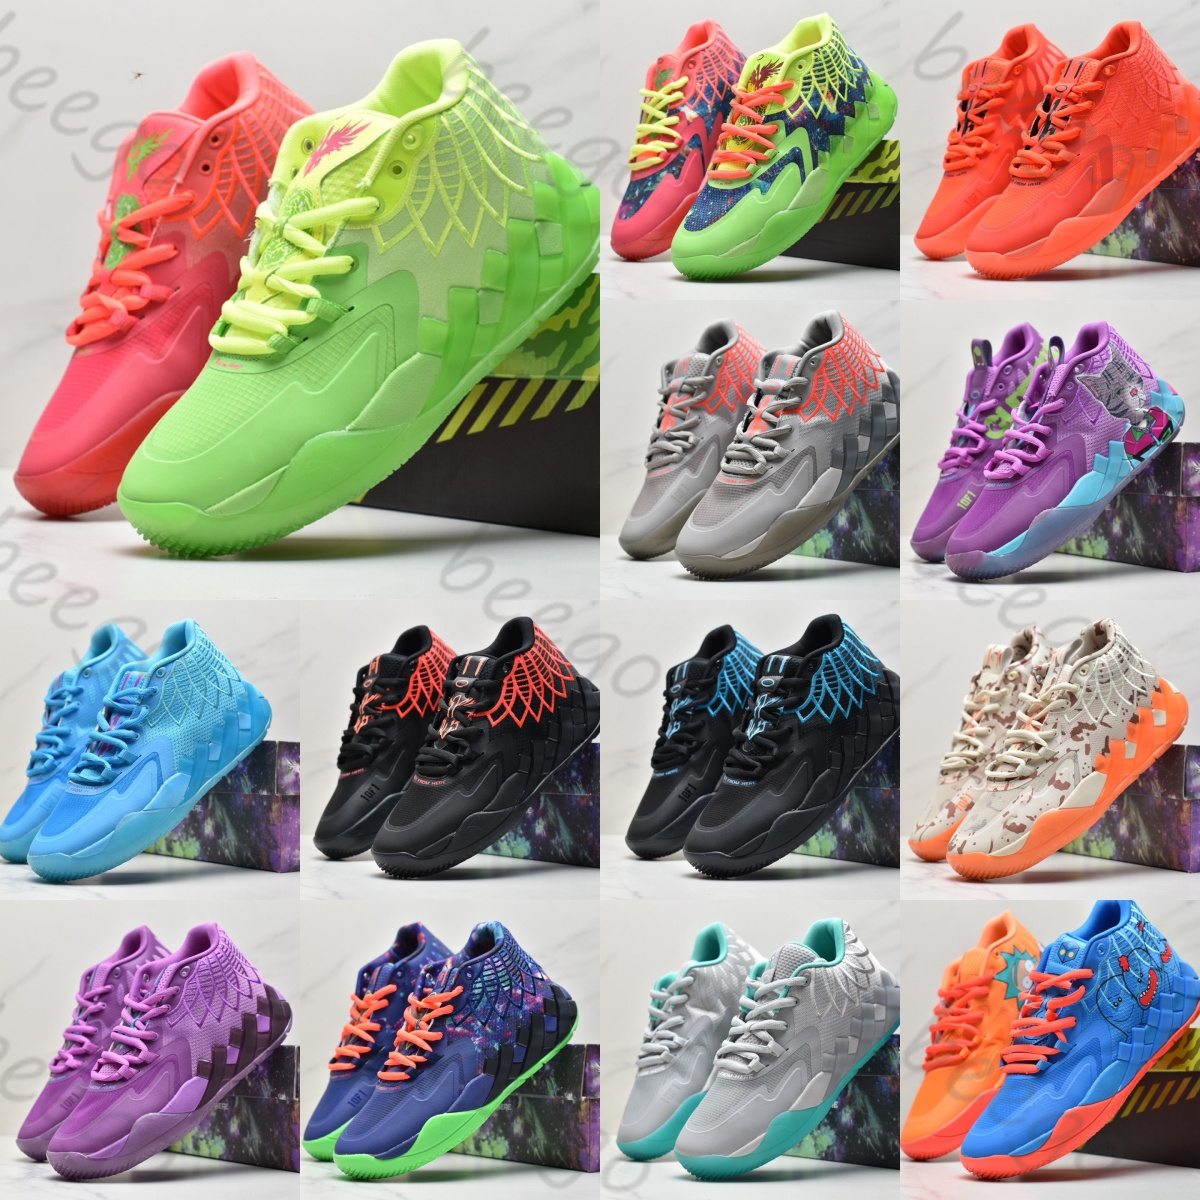 

Basketball Shoes MB 1 Rick And Morty for sale LaMelos Ball Men Women Iridescent Dreams Buzz City Rock Ridge Red Galaxy Not Lamelo, #1